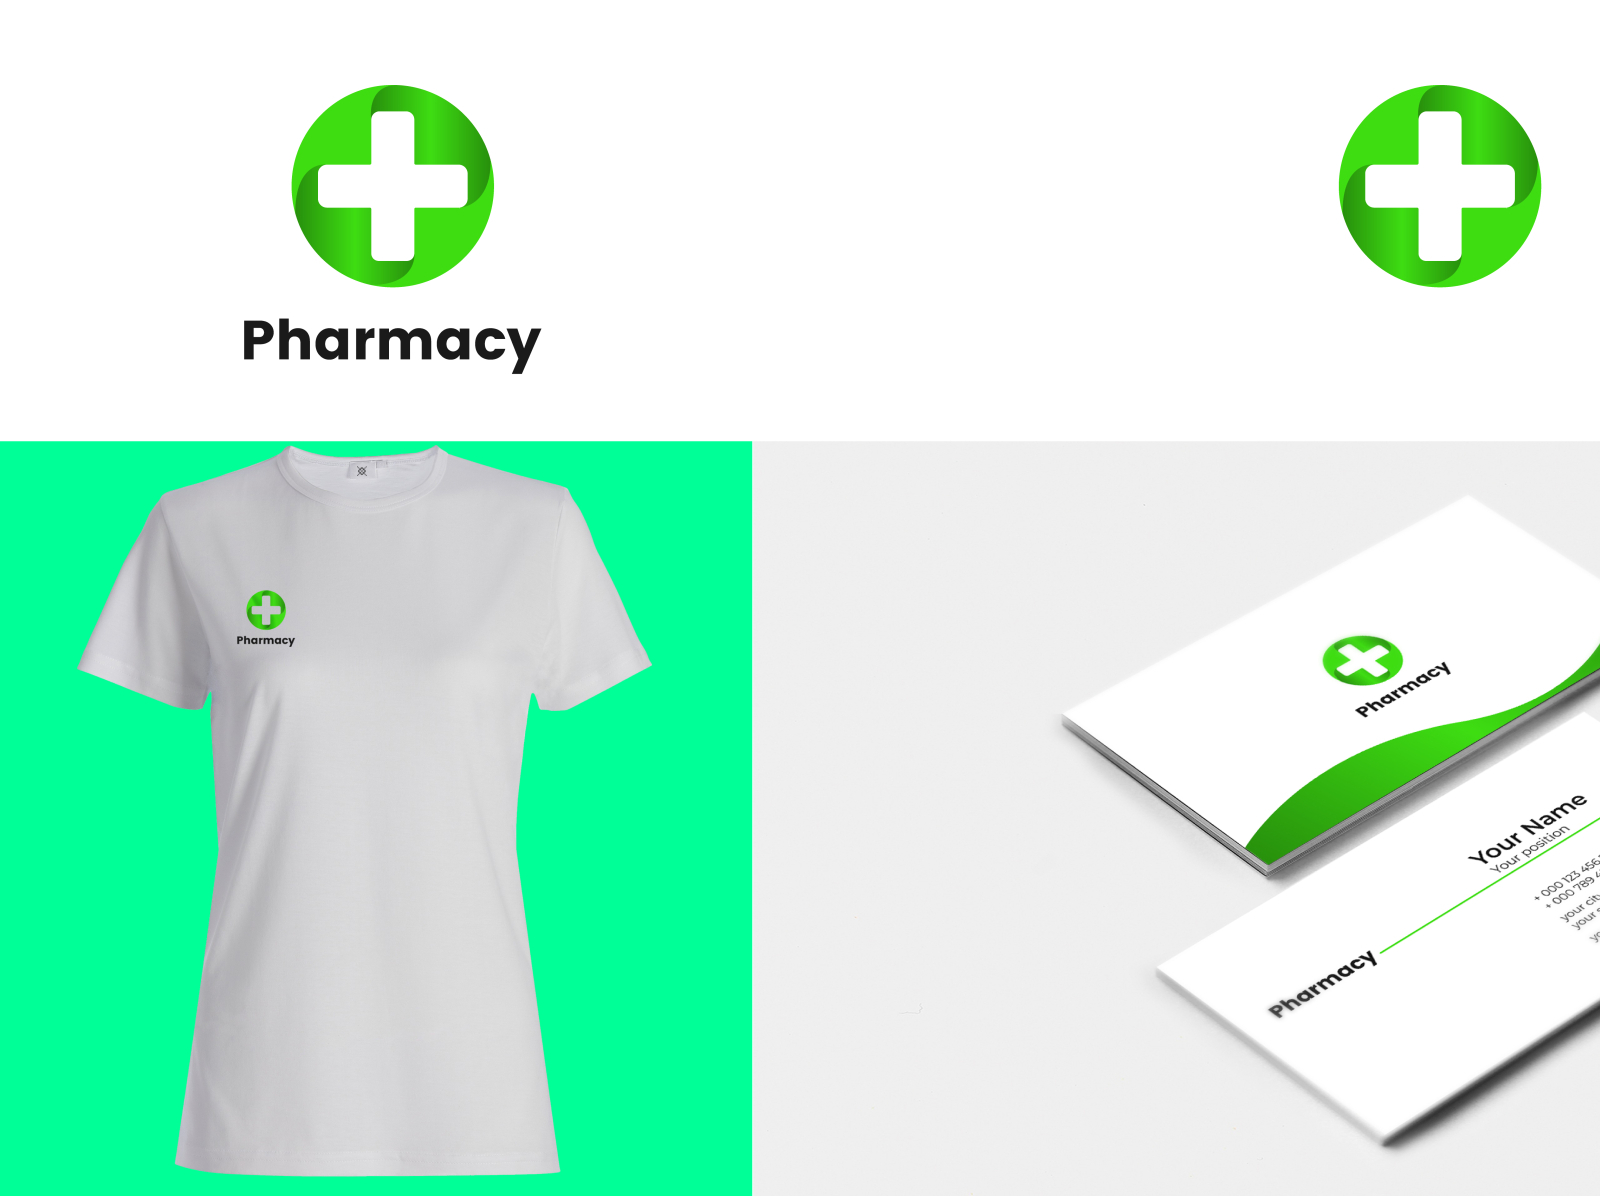 Natural Pharmacy Cross Business Card | BrandCrowd Business Card Maker